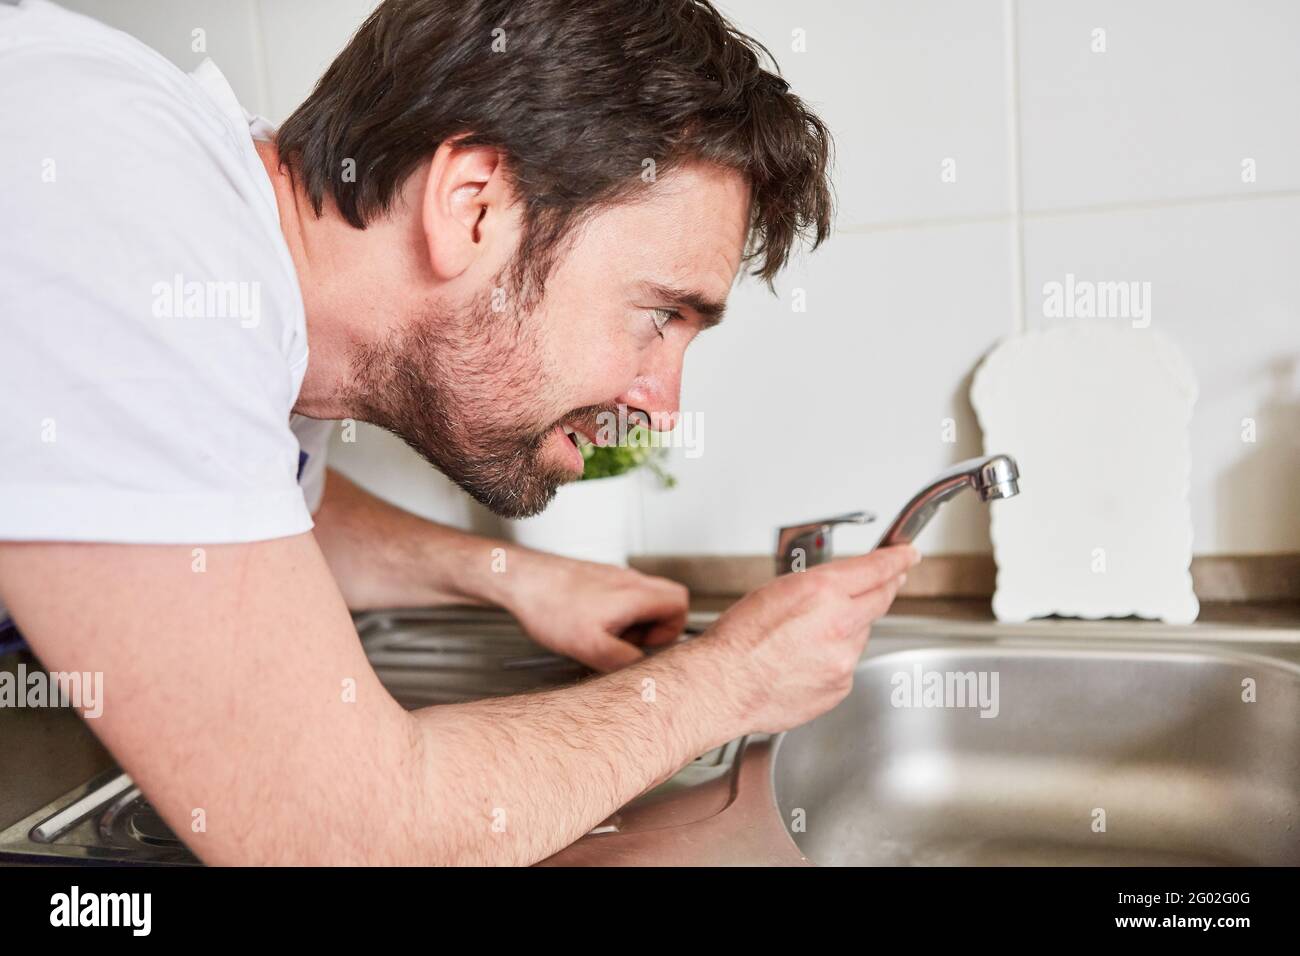 Do-it-yourselfer or professional plumber connecting the kitchen faucet Stock Photo